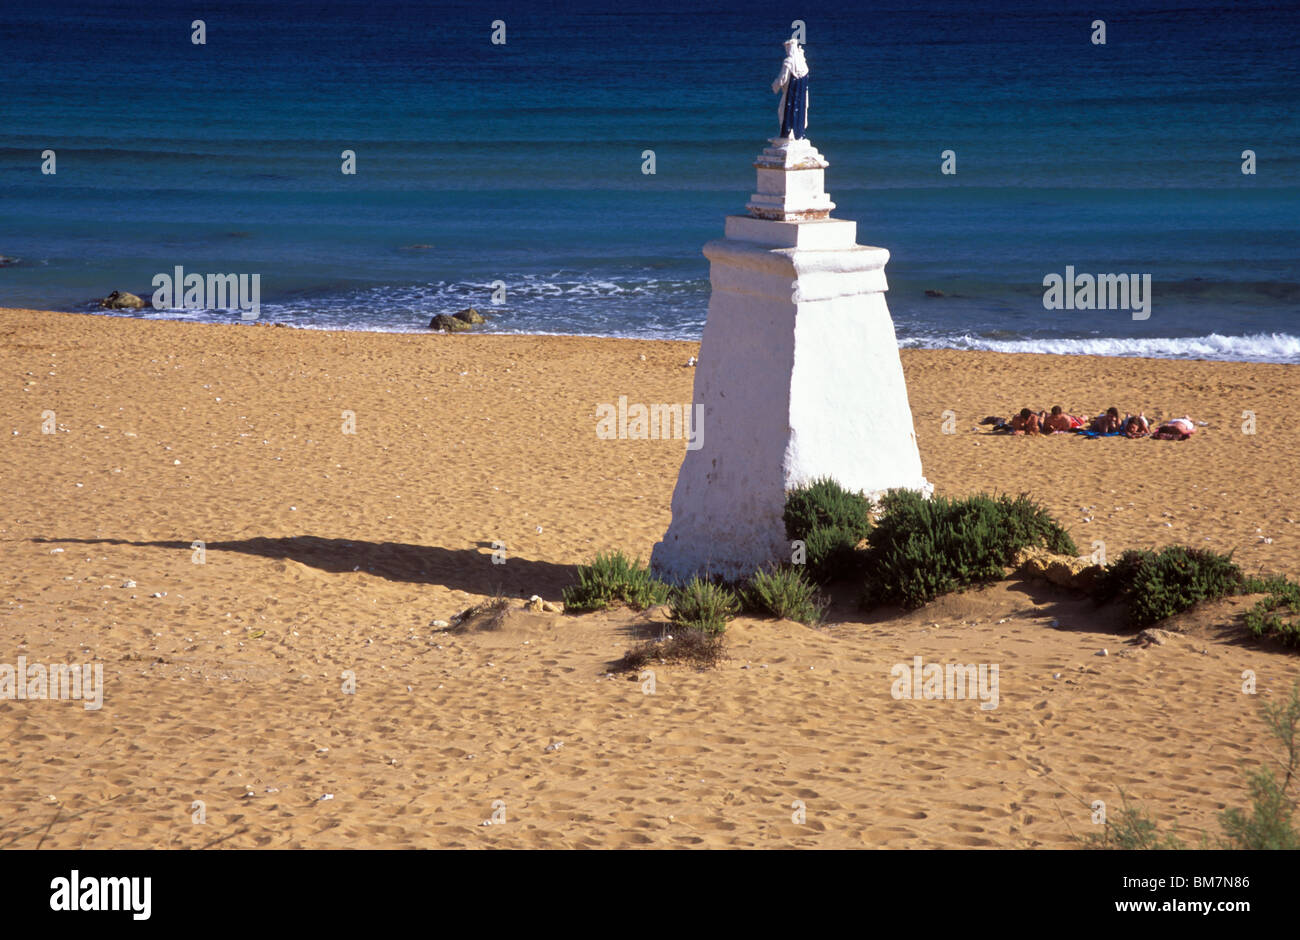 Malta, the picturesque niche holding a statue of the Madonna at Ramla Bay, Gozo. Stock Photo